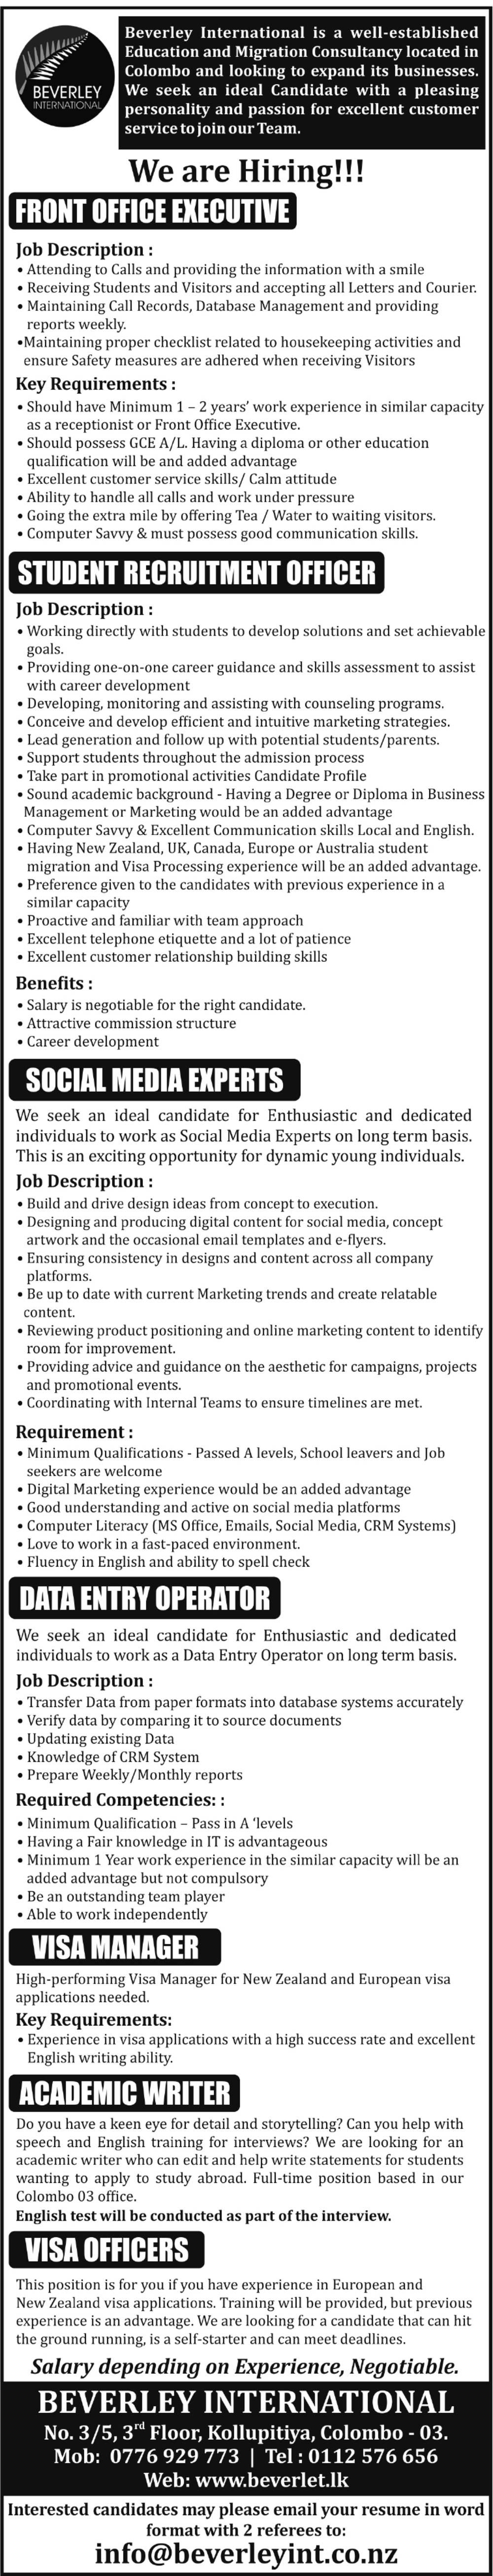 You are currently viewing Front Office Executive / Recruitment Officer / Social Media Experts